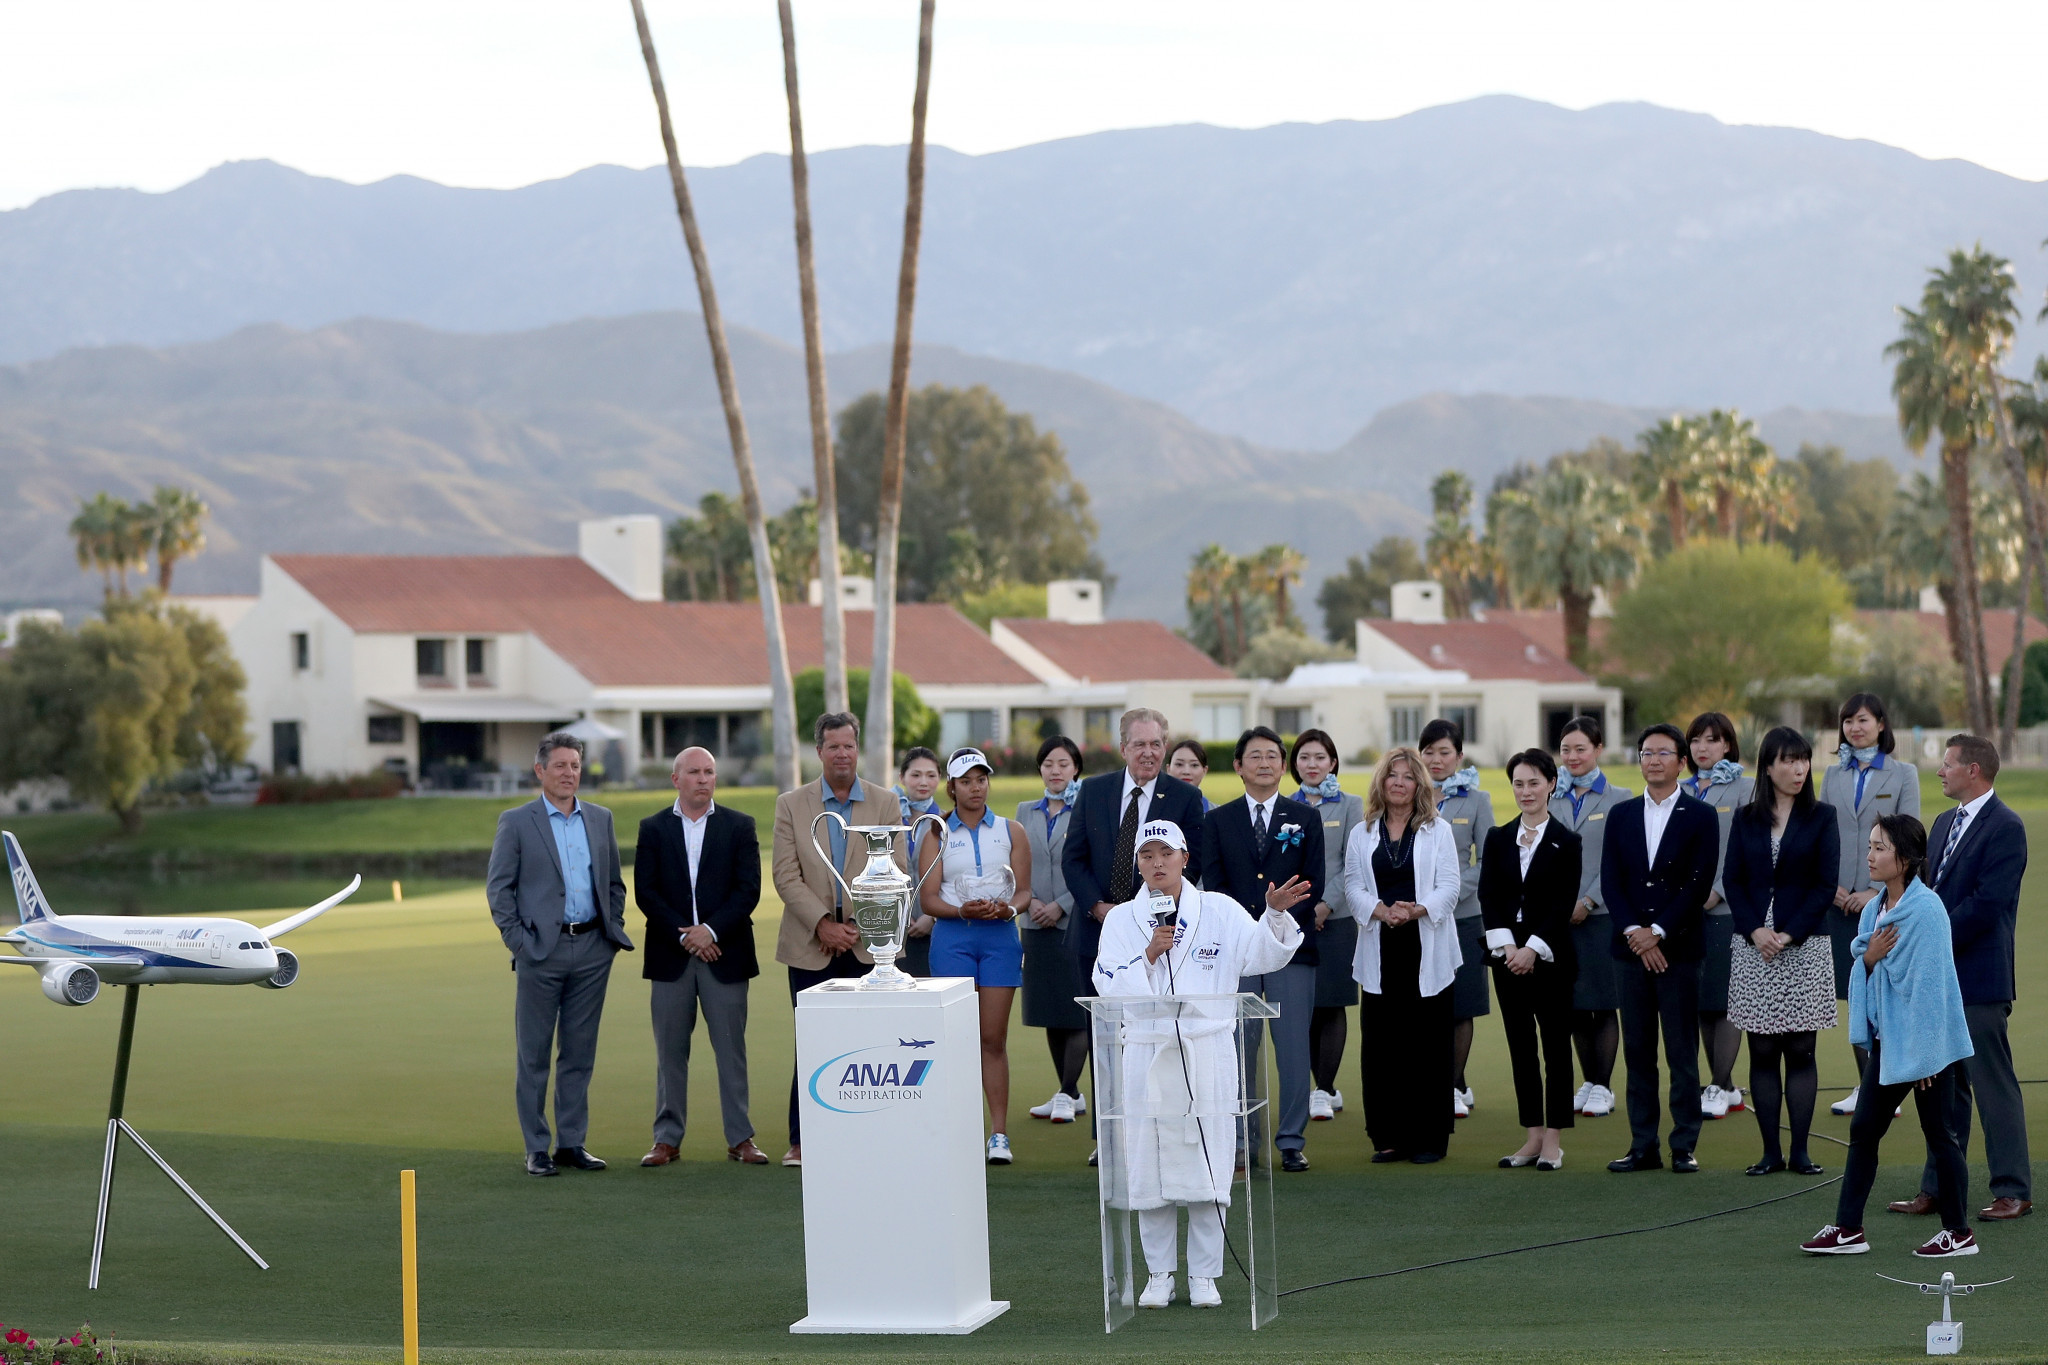 South Korea’s Ko Jin-young secured her first Major success with a three-shot win at the ANA Inspiration in California ©Getty Images